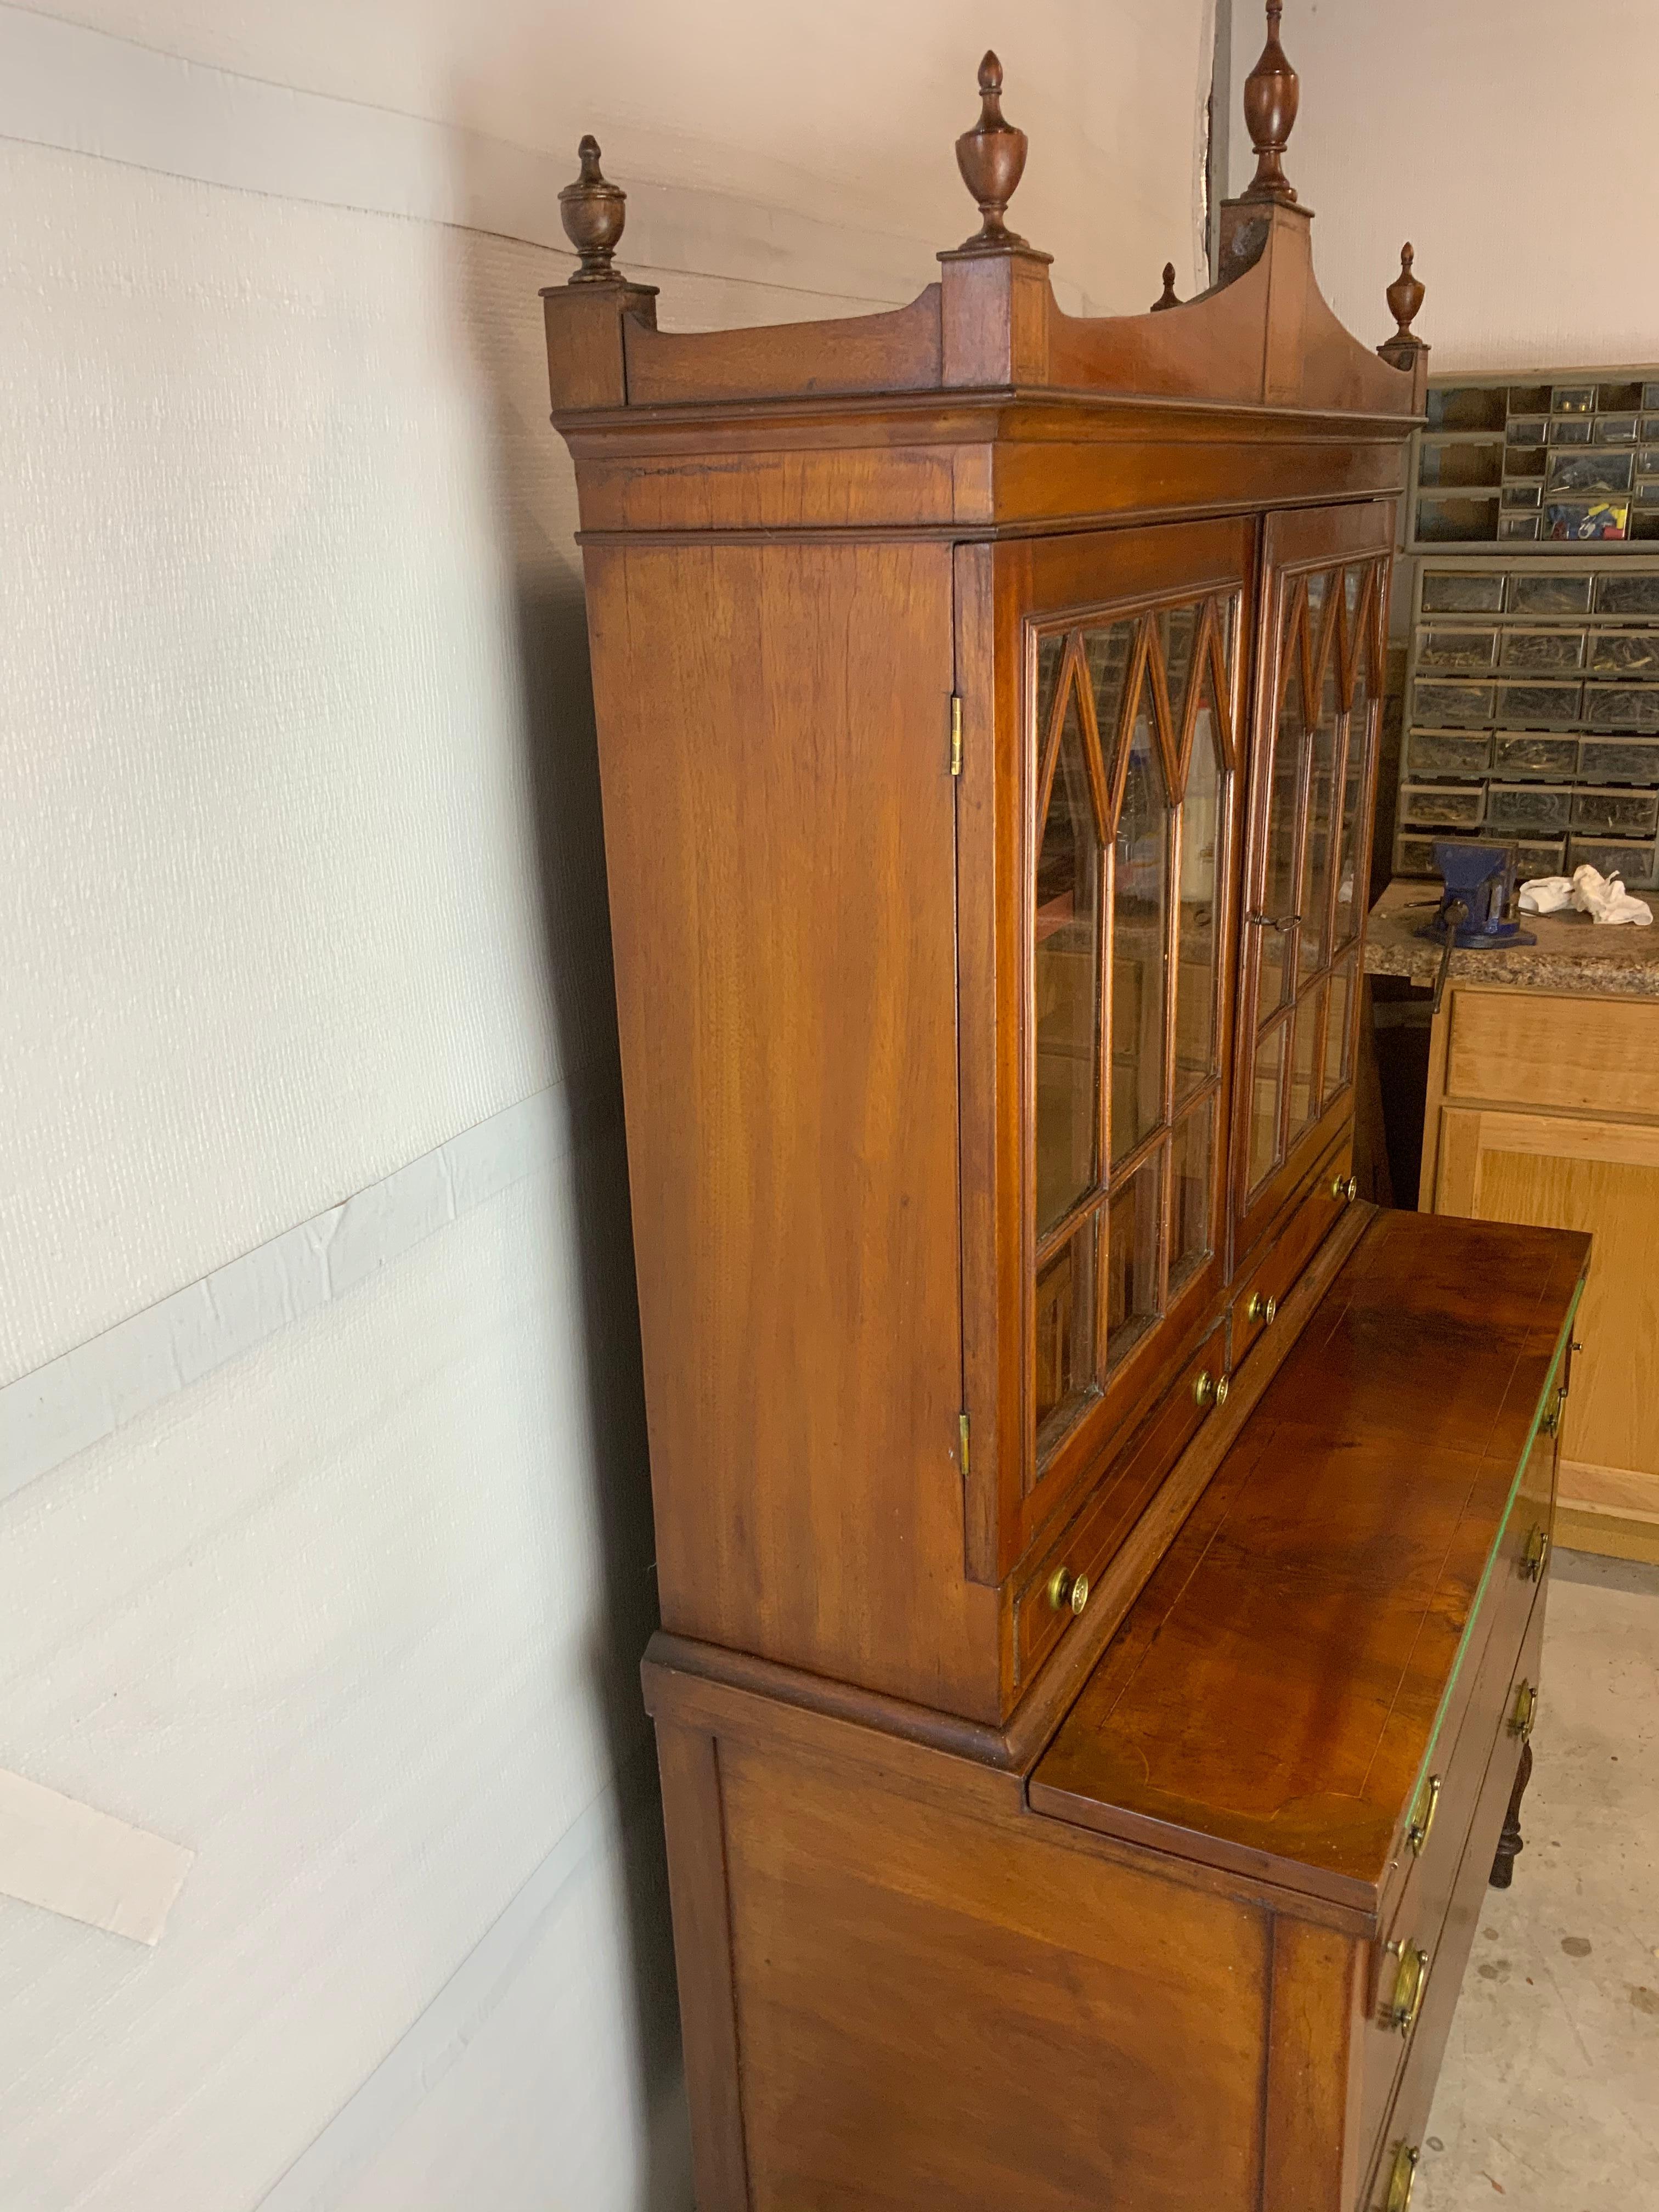  American Cherry and Mahogany two piece Sheraton Bookcase Secretary 1790-1820. This is a great smaller sized secretary with an old finish and a beautiful aged color and patina that is in very good condition. The old wavy glass on the doors are